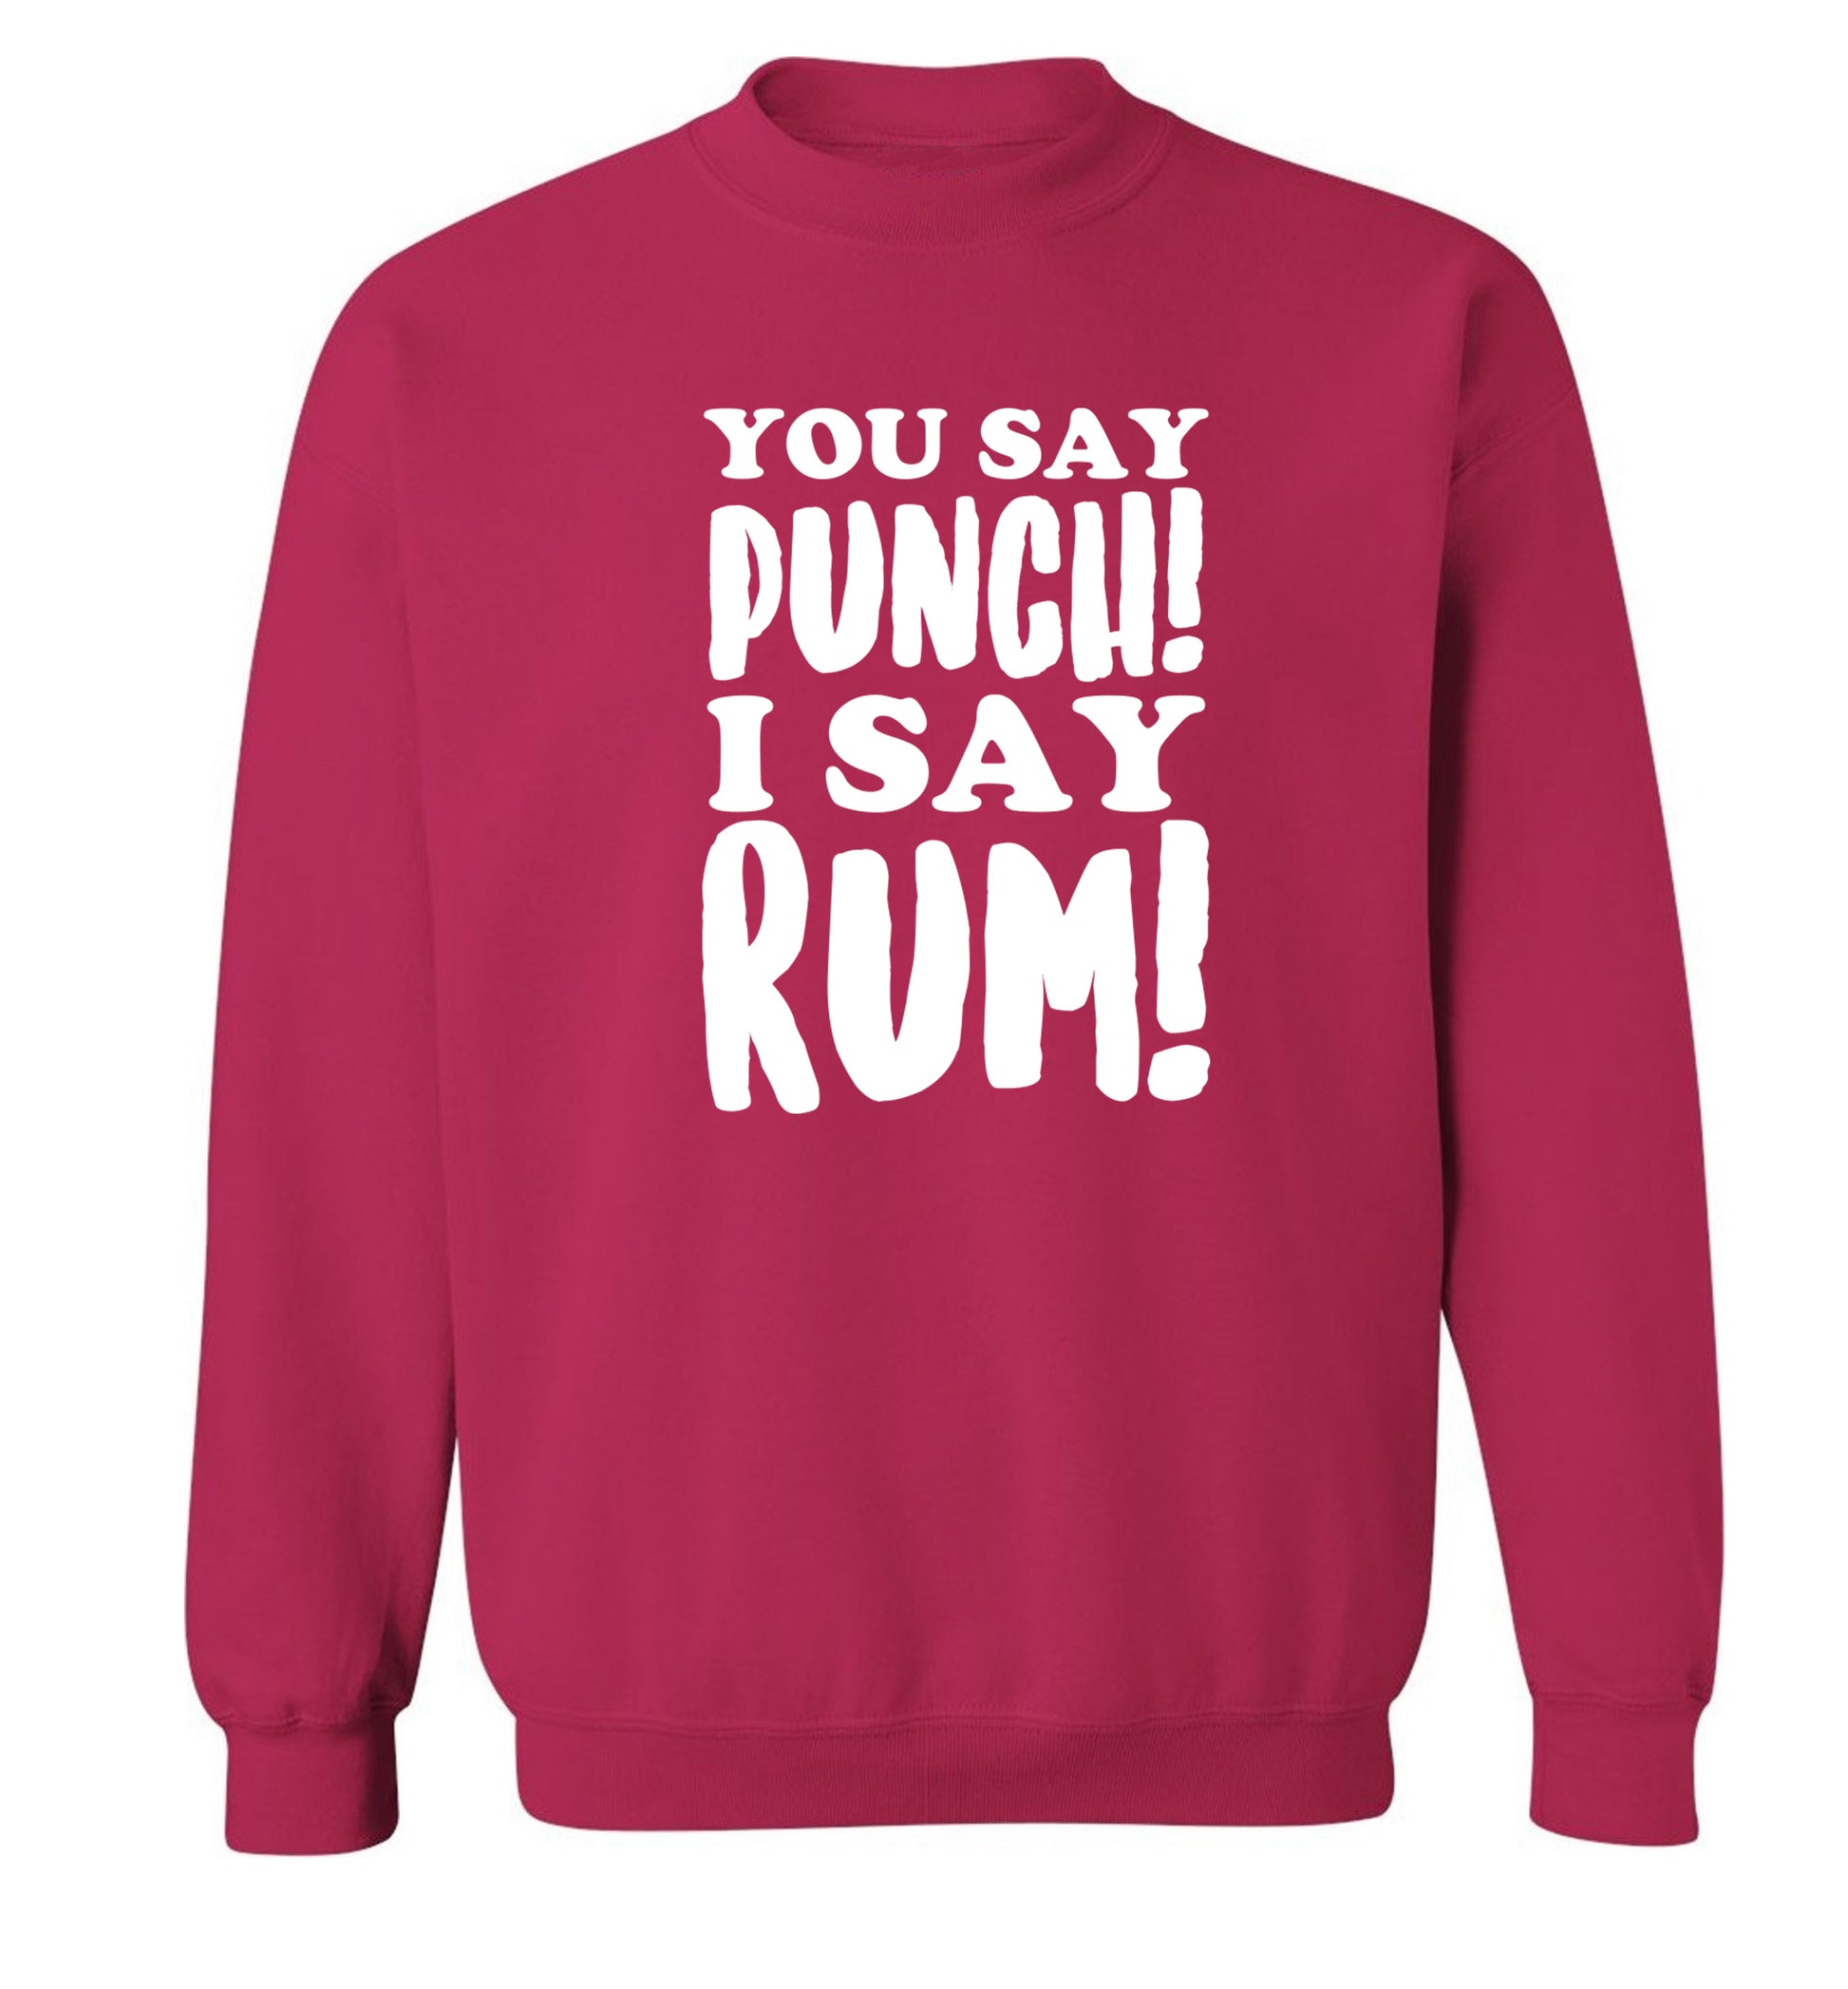 You say punch I say rum! Adult's unisex pink Sweater 2XL